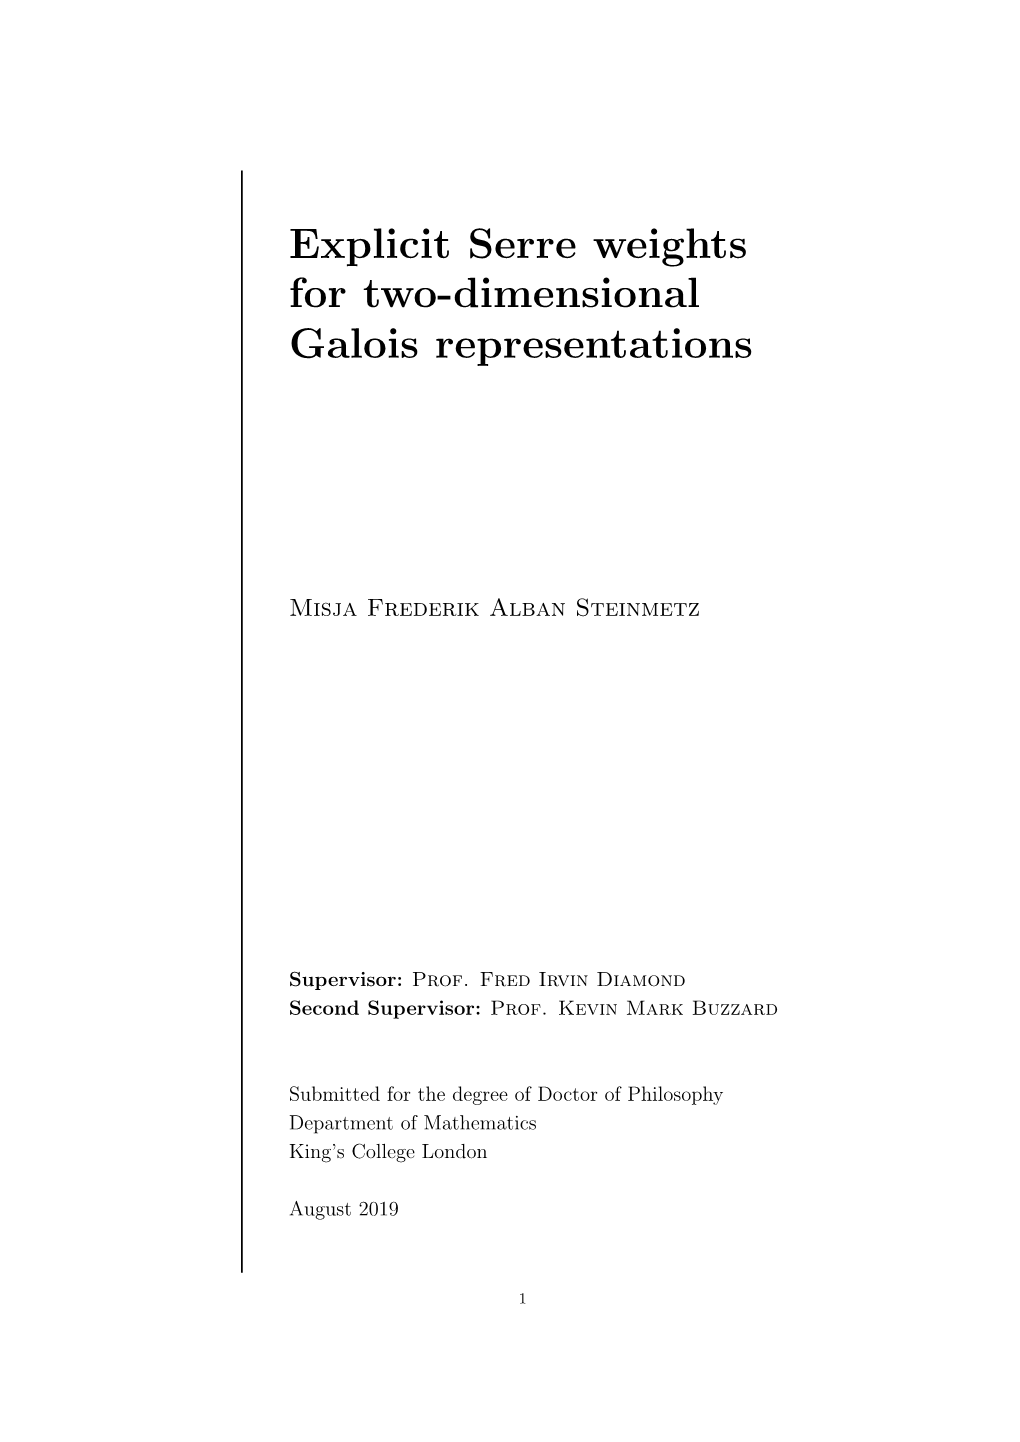 Explicit Serre Weights for Two-Dimensional Galois Representations